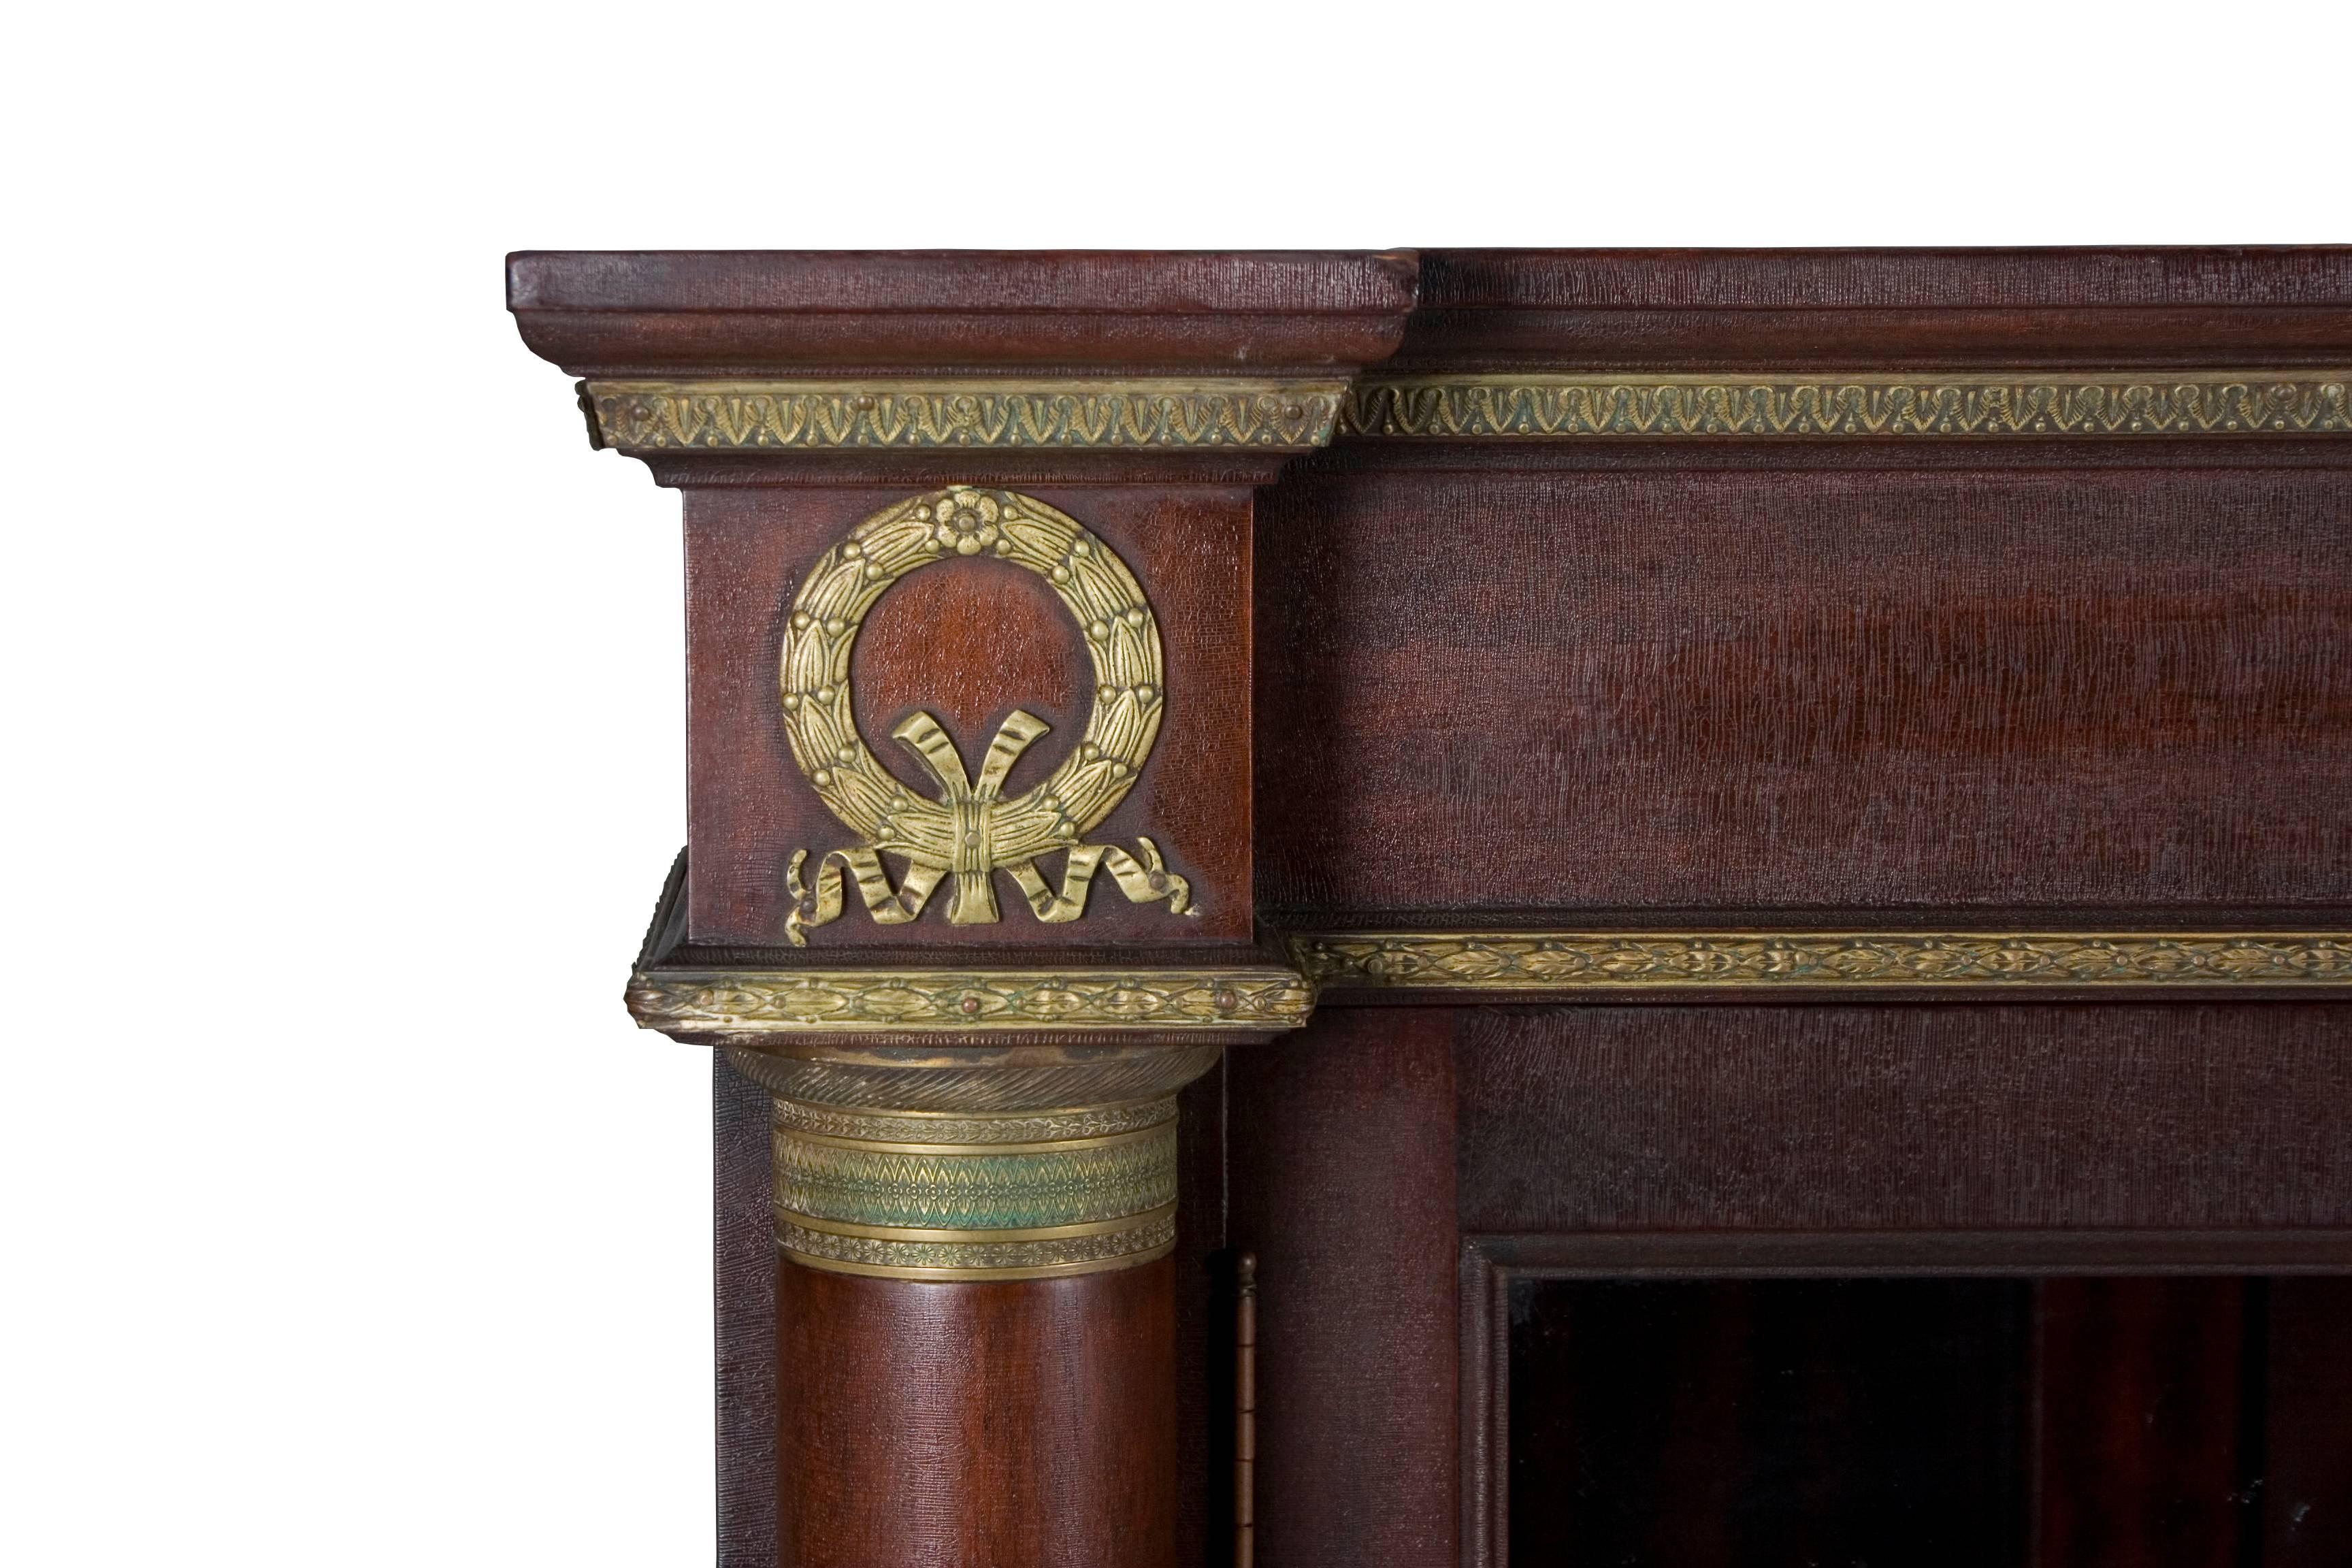 This bookcase is a stunning piece done in the Empire style. Recently imported from Europe, we estimate it was made circa 1960. It features a dark mahogany wood with brass ormolu decorations and large paw feet on casters. Two smooth columns flank a